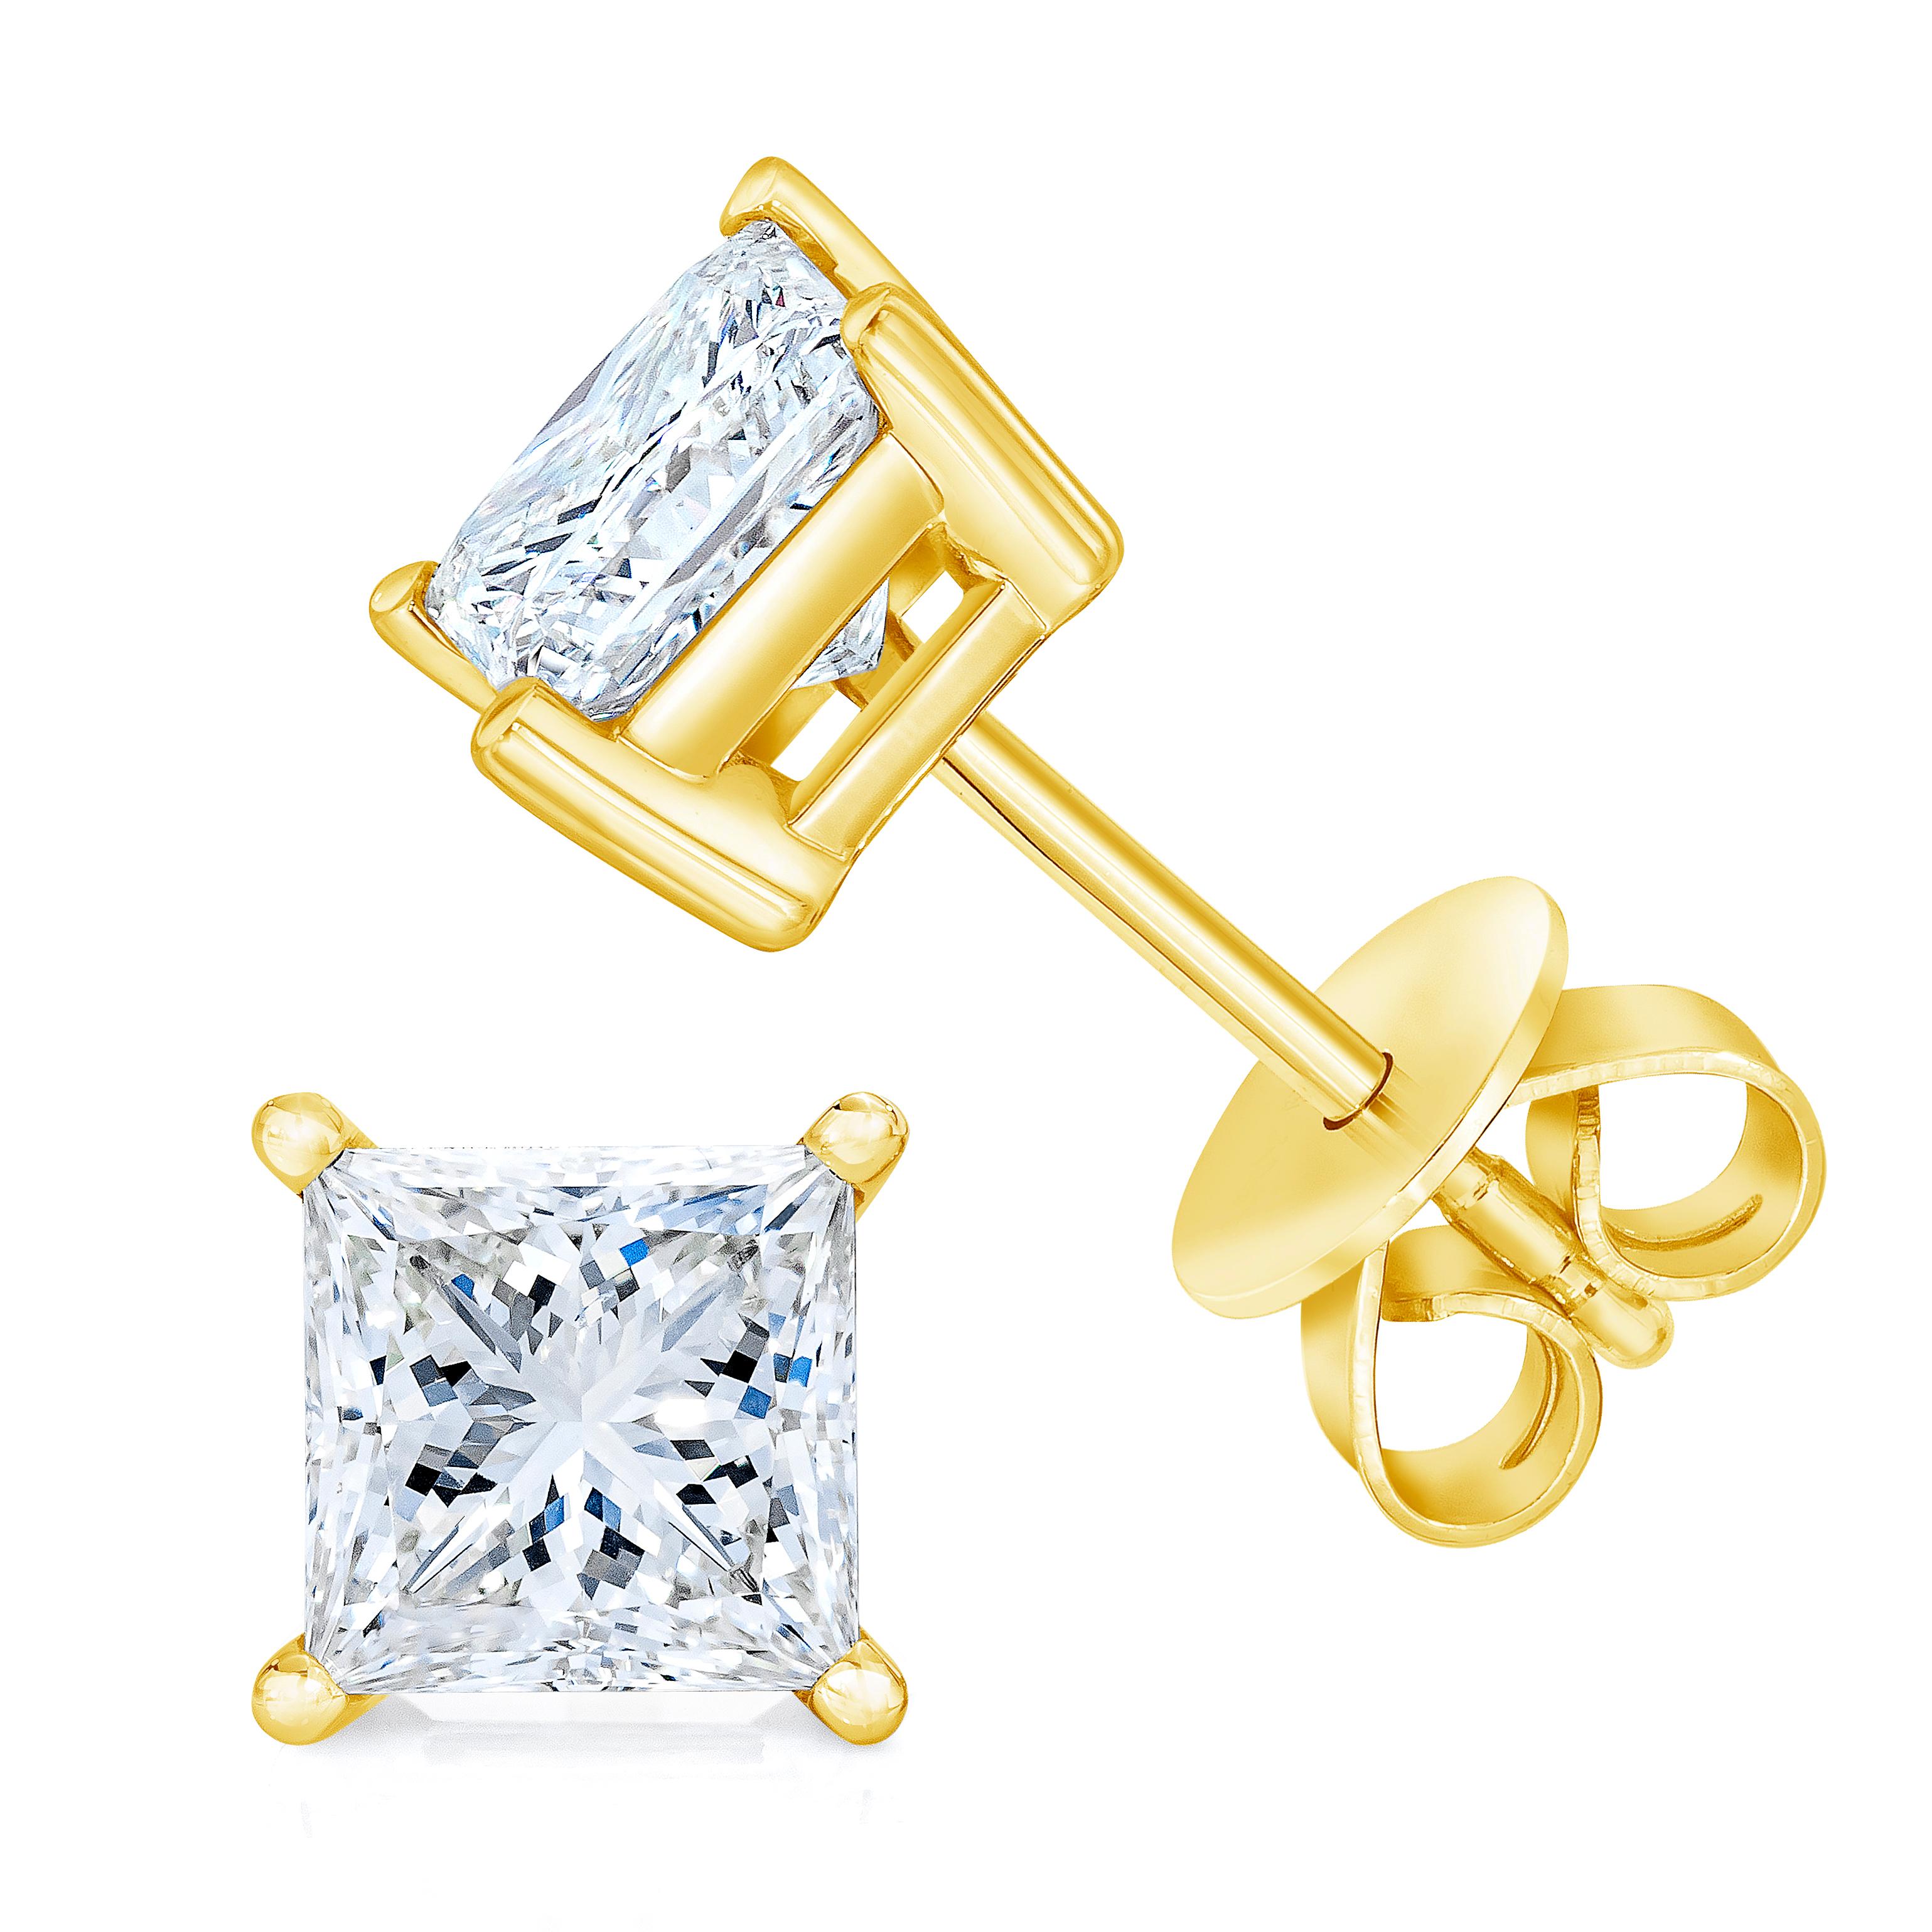 Celebrate any occasion with these classic shimmering diamond stud earrings. Crafted from 14k Yellow Gold each earring showcases a sparkling Princess-Cut Solitaire Diamond in a 4-Prong Setting. Dazzling with 1/3 cttw of diamonds and a bright polished